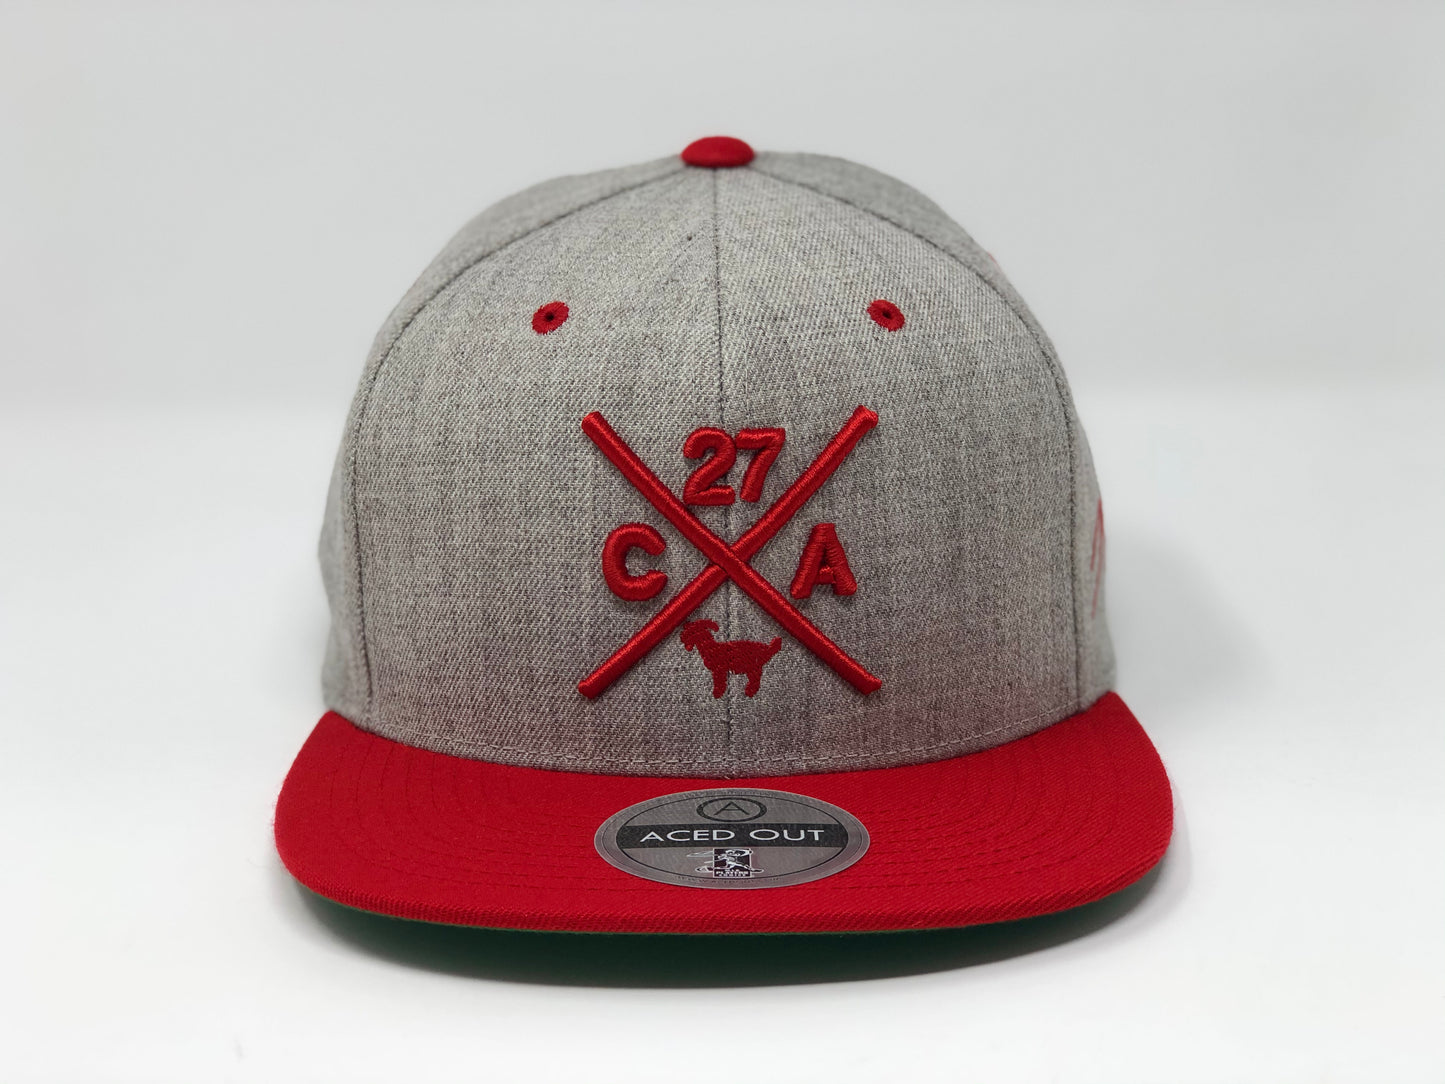 Mike Trout Compass Hat - Grey/Red Snapback